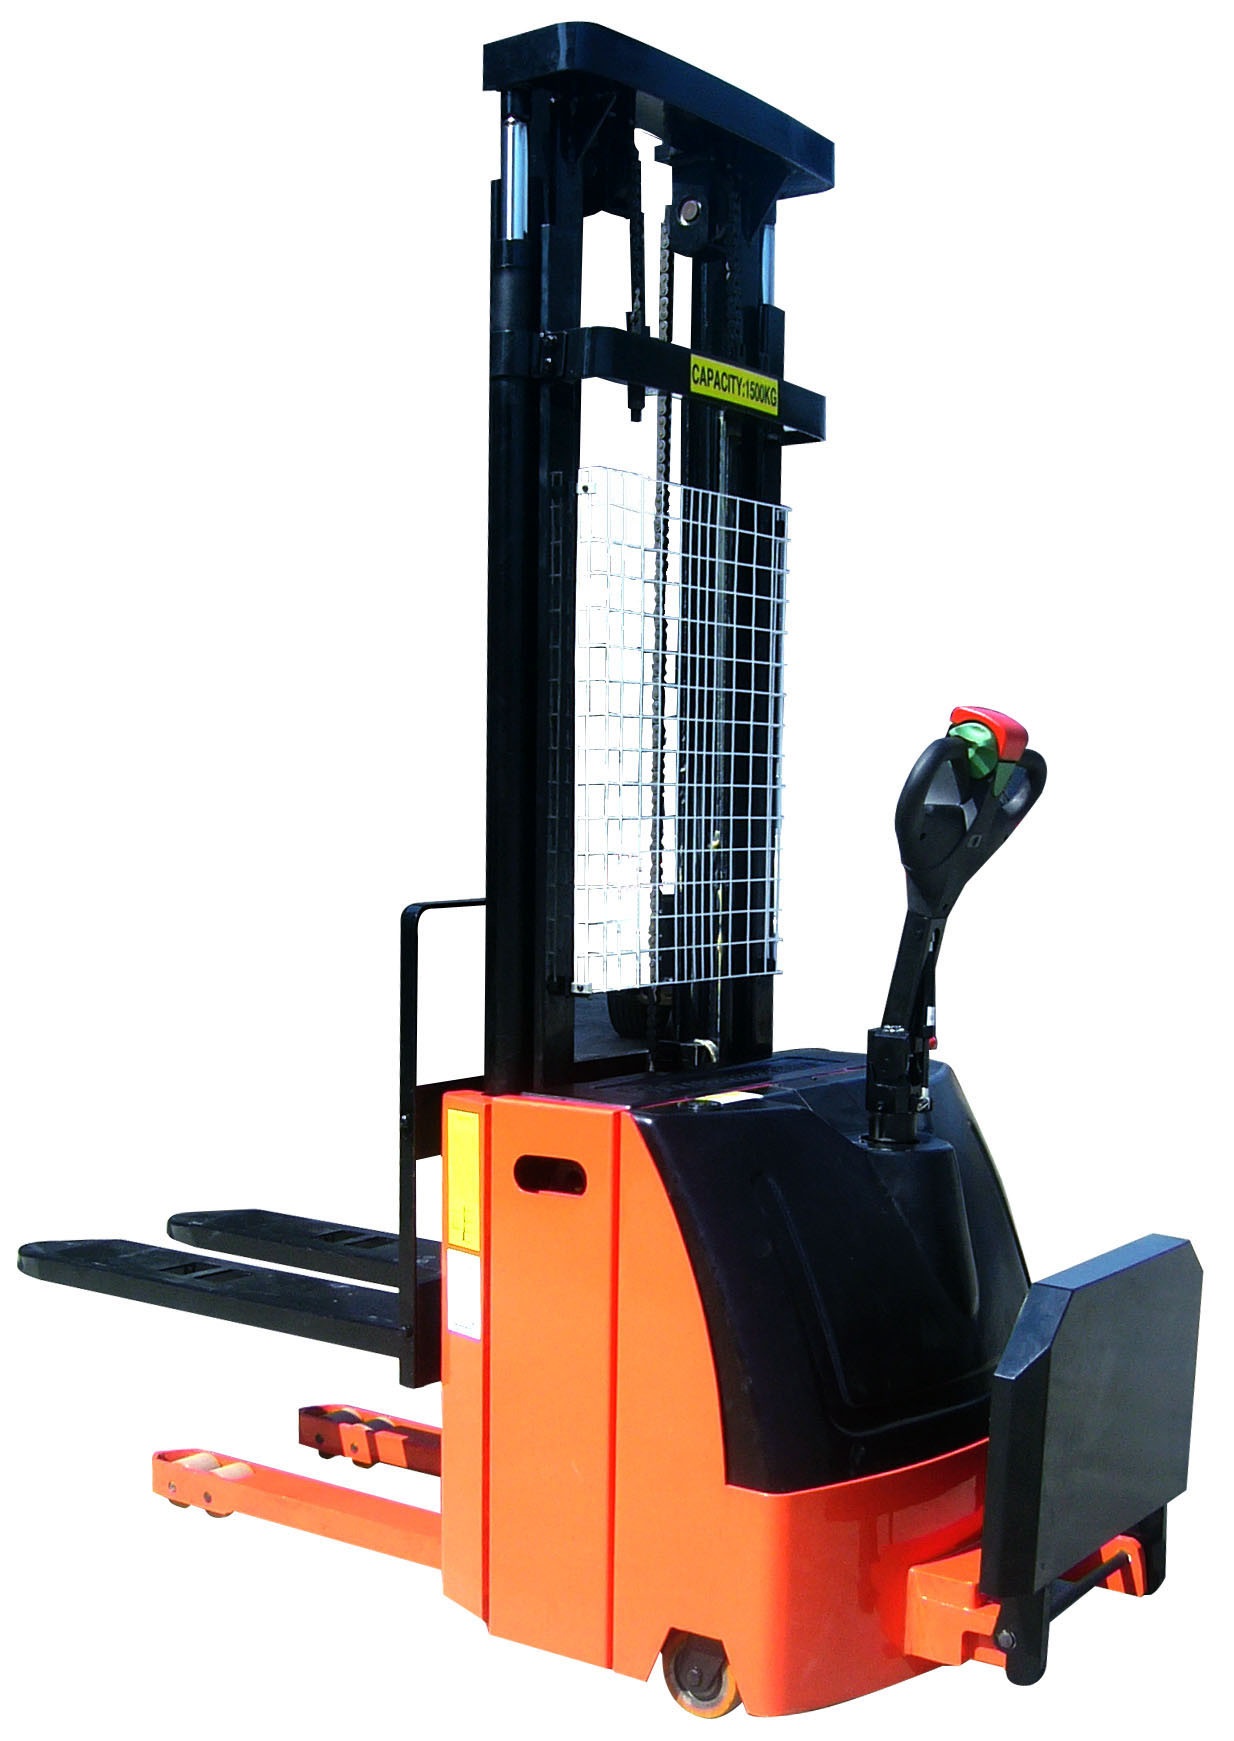 China Supplier of Electric Pallet Stackers3-1.jpg